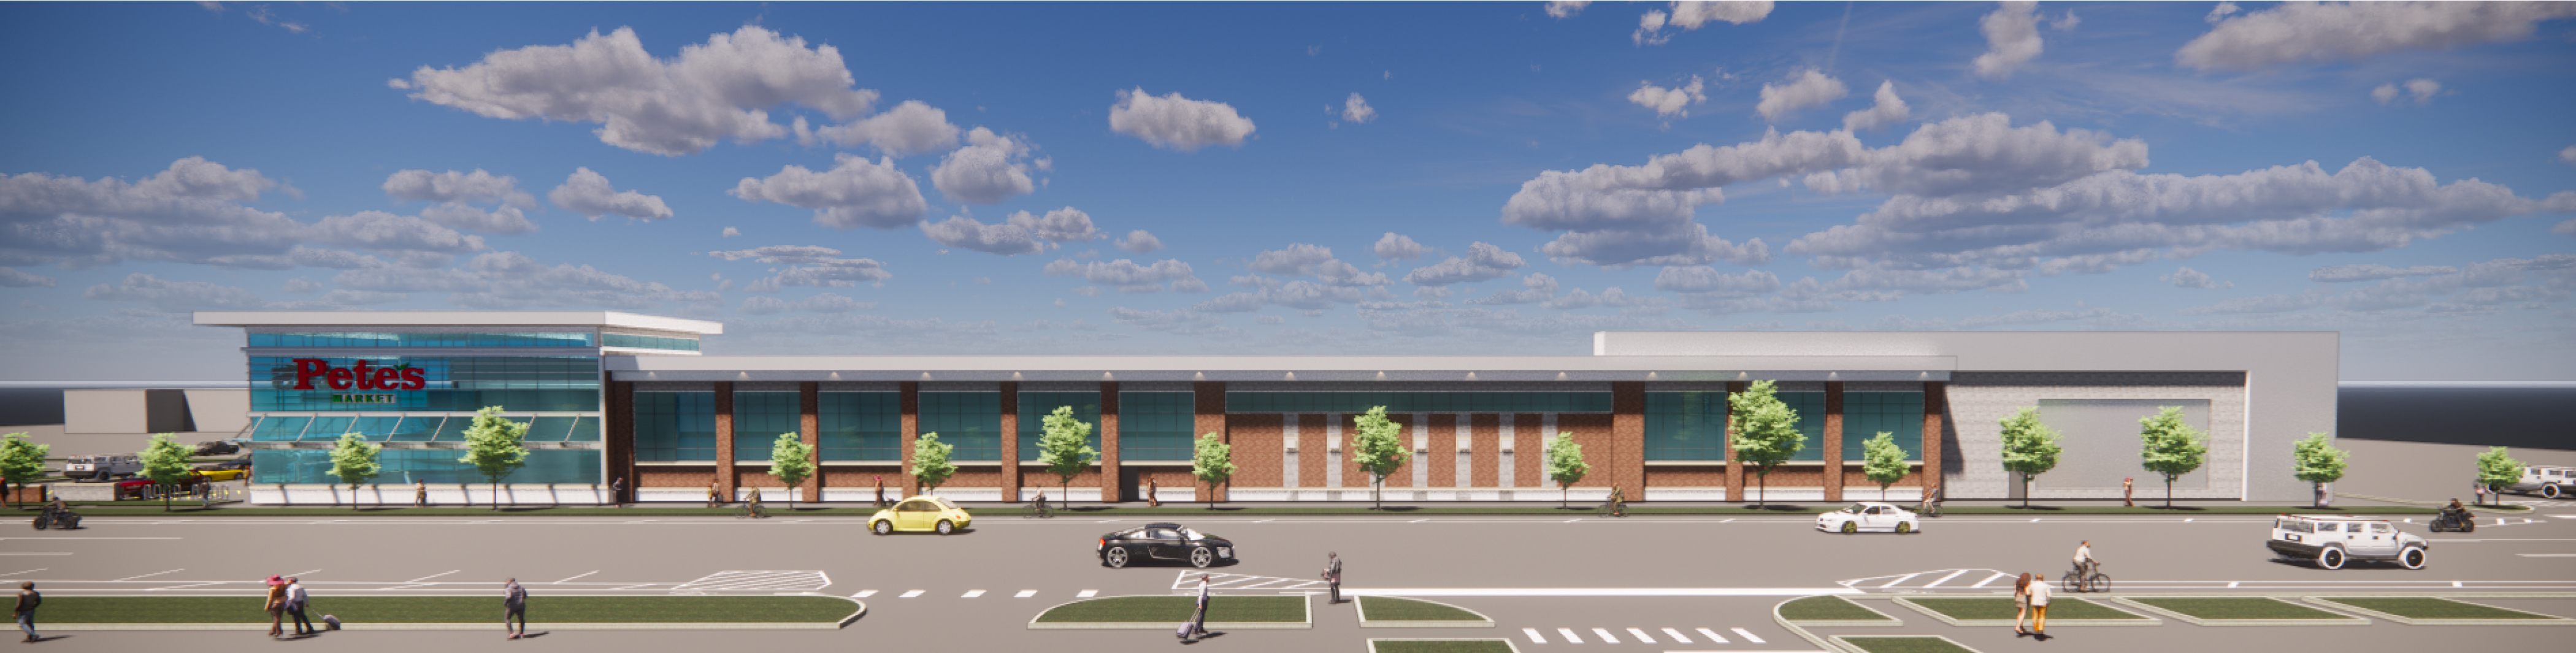 artist's rendering of new Pete's Fresh Market coming to Madison Street